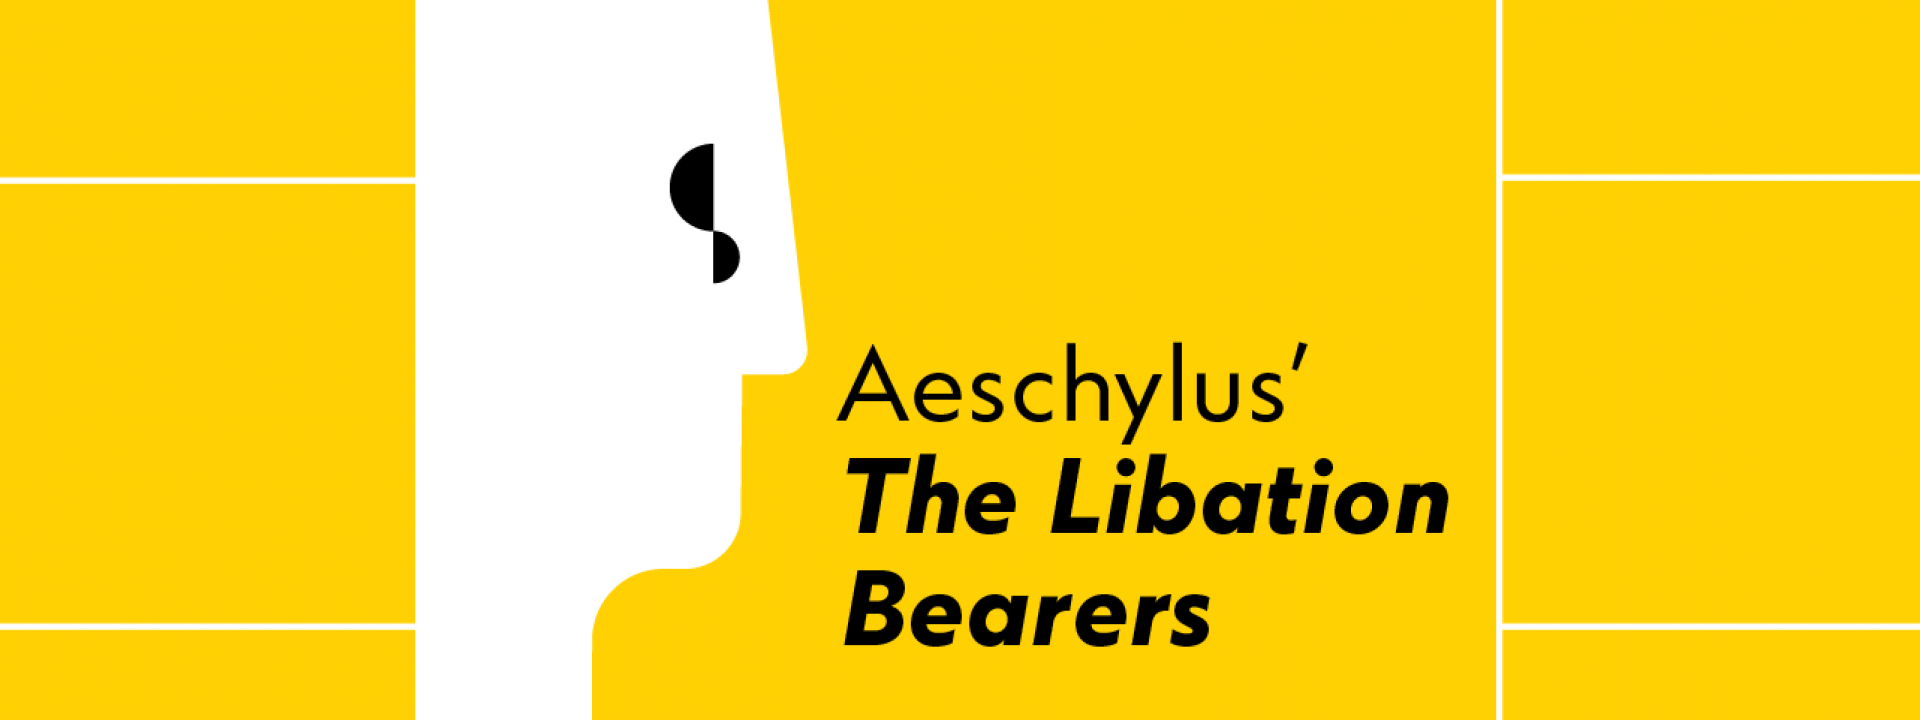 Parabases: Faces of the Hero | Aeschylus’ The Libation Bearers - Εικόνα